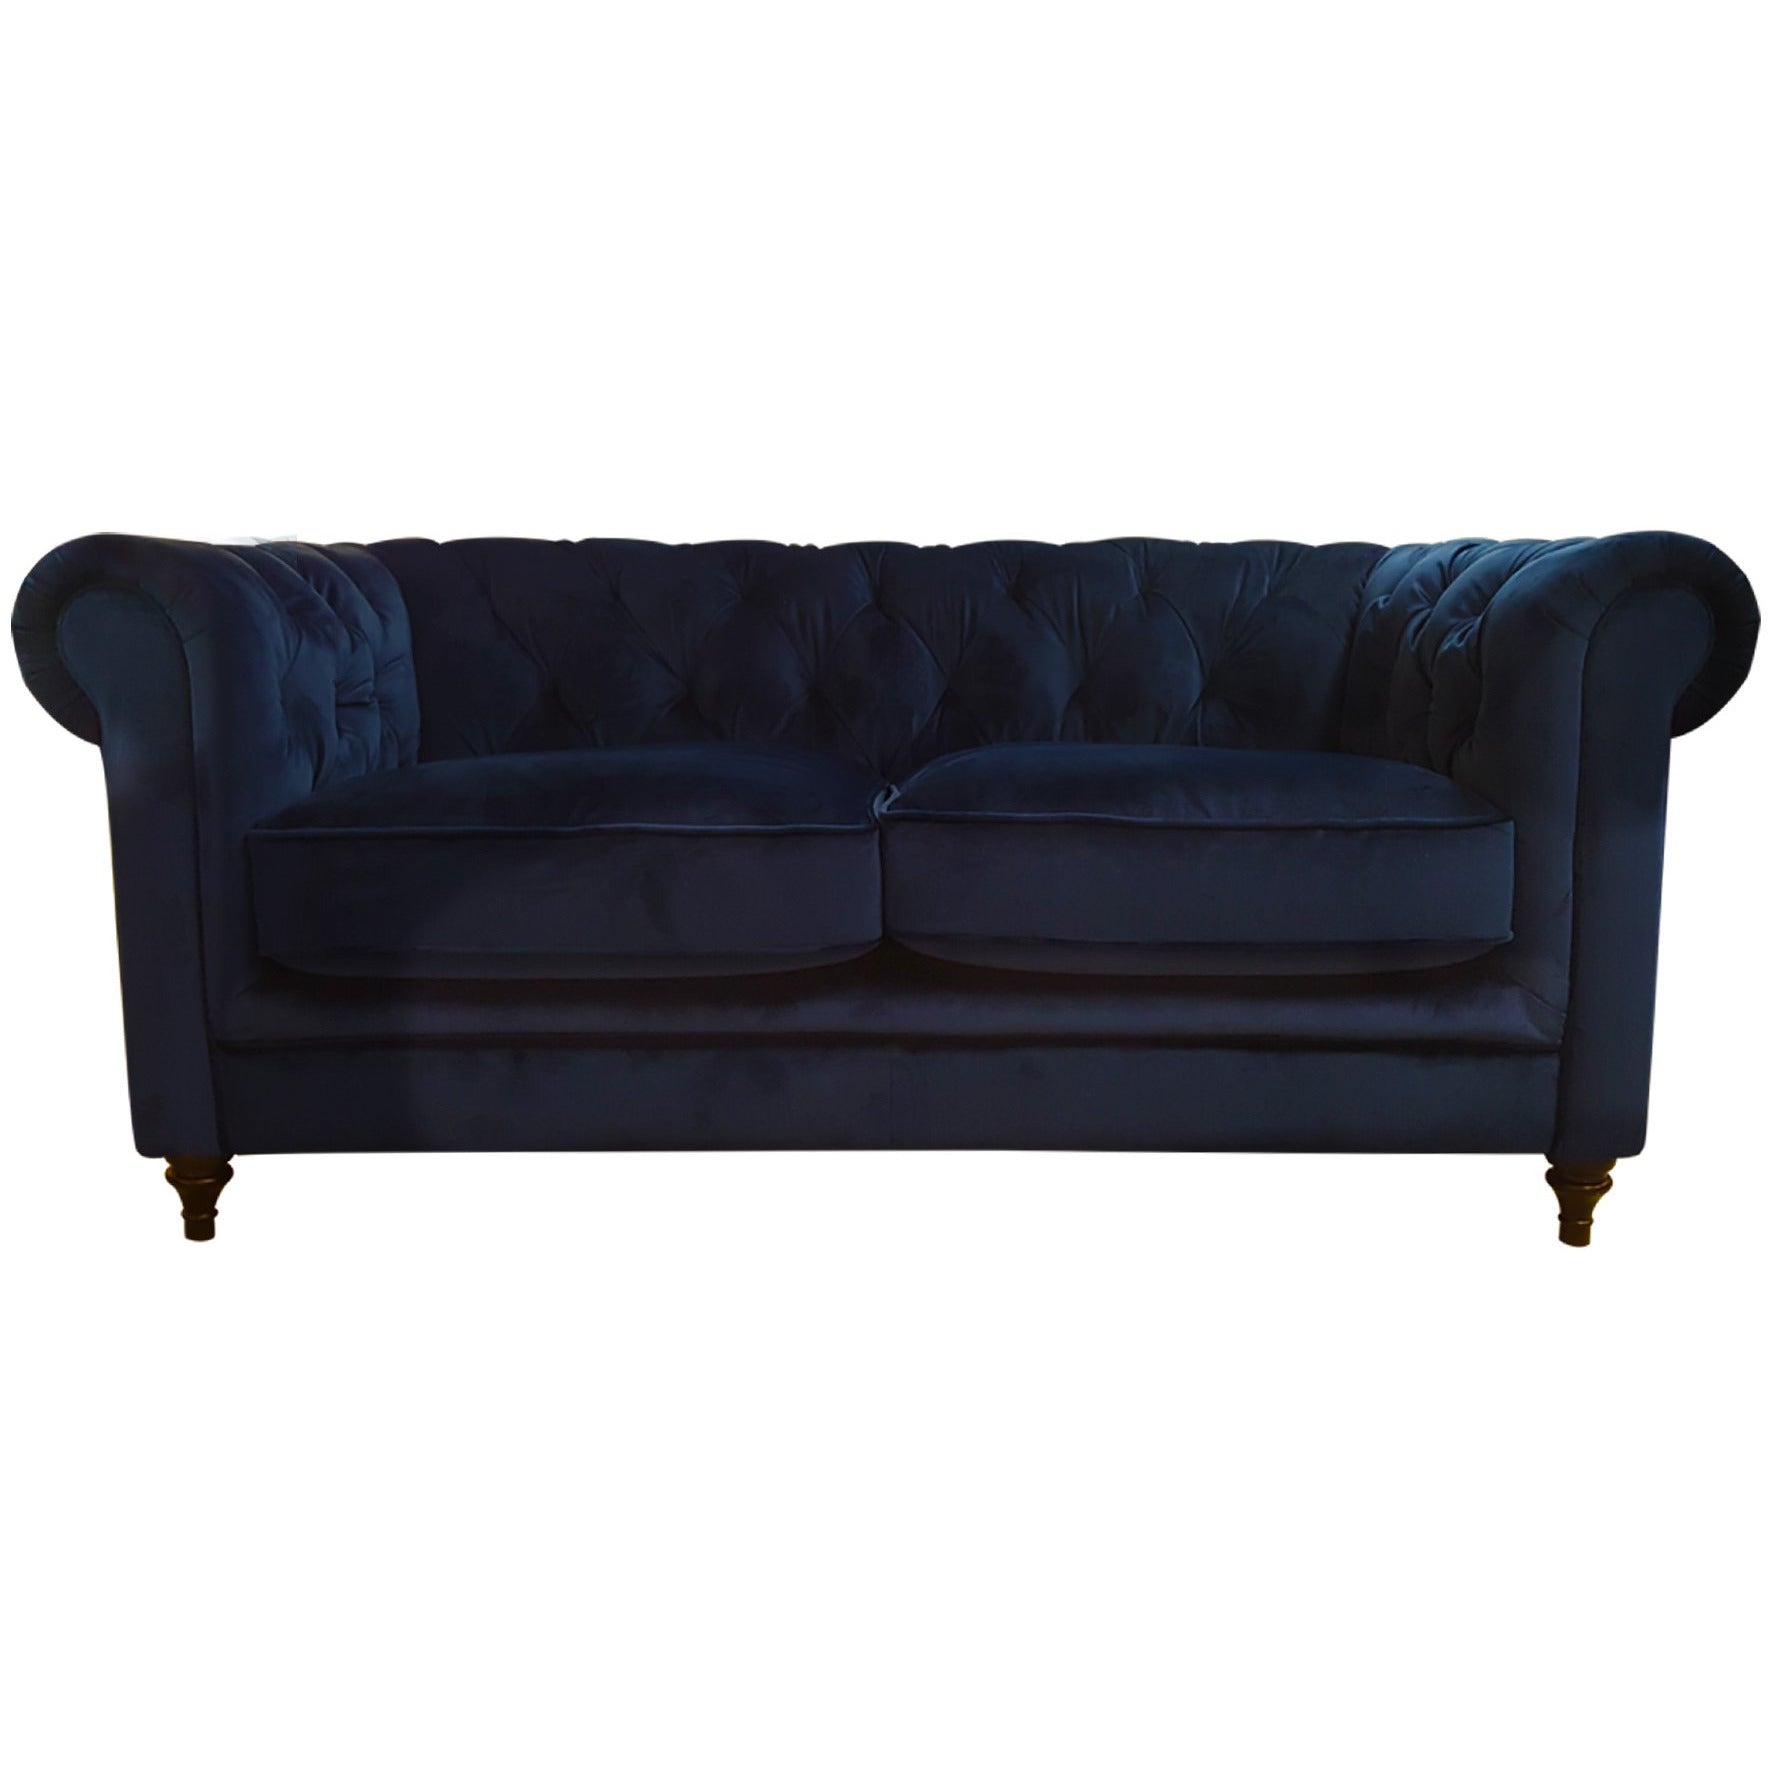 Chesterfield 2 Seater Velvet Sofa from Upstairs Downstairs Furniture in Lisburn, Monaghan and Enniskillen